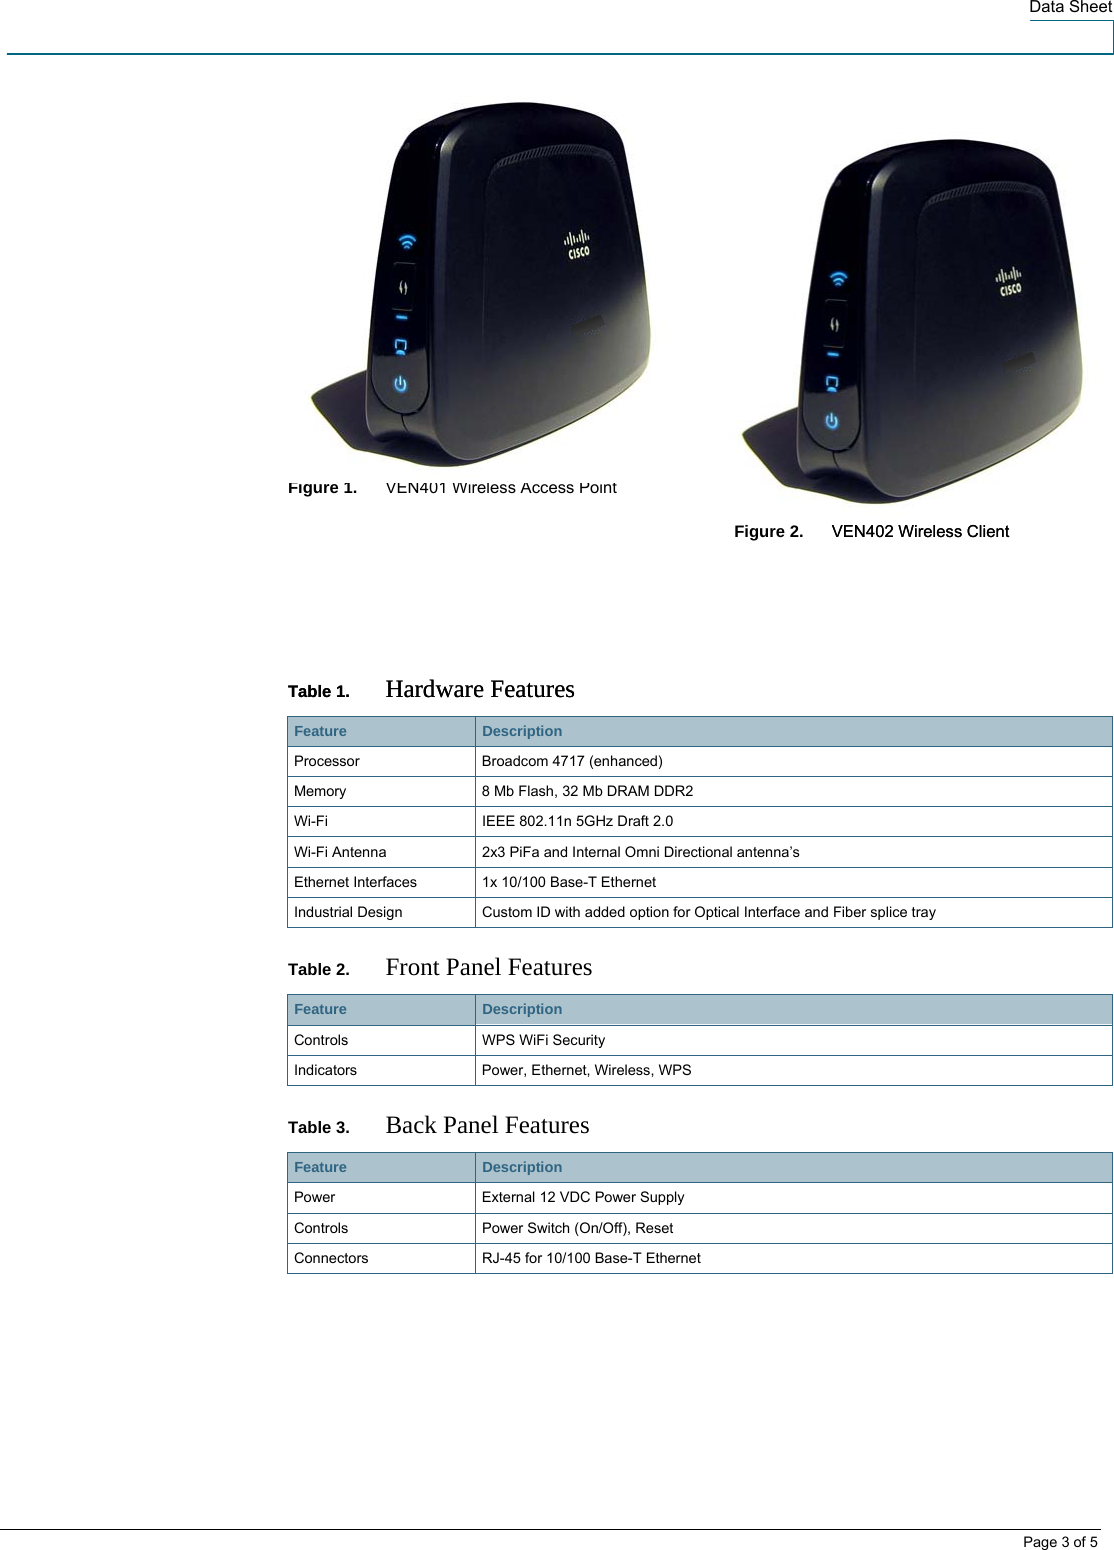  Data Sheet         Figure 1.    VEN401 Wireless Access Point     Figure 2.    VEN402 Wireless Client VEN402 Wireless Client     Table 1.  Hardware Features Table 1.  Hardware Features Feature   Description Processor  Broadcom 4717 (enhanced) Memory  8 Mb Flash, 32 Mb DRAM DDR2 Wi-Fi   IEEE 802.11n 5GHz Draft 2.0 Wi-Fi Antenna  2x3 PiFa and Internal Omni Directional antenna’s Ethernet Interfaces  1x 10/100 Base-T Ethernet  Industrial Design  Custom ID with added option for Optical Interface and Fiber splice tray Table 2.  Front Panel Features Feature   Description Controls WPS WiFi Security Indicators Power, Ethernet, Wireless, WPS Table 3.  Back Panel Features Feature   Description Power  External 12 VDC Power Supply Controls  Power Switch (On/Off), Reset Connectors RJ-45 for 10/100 Base-T Ethernet     Page 3 of 5 